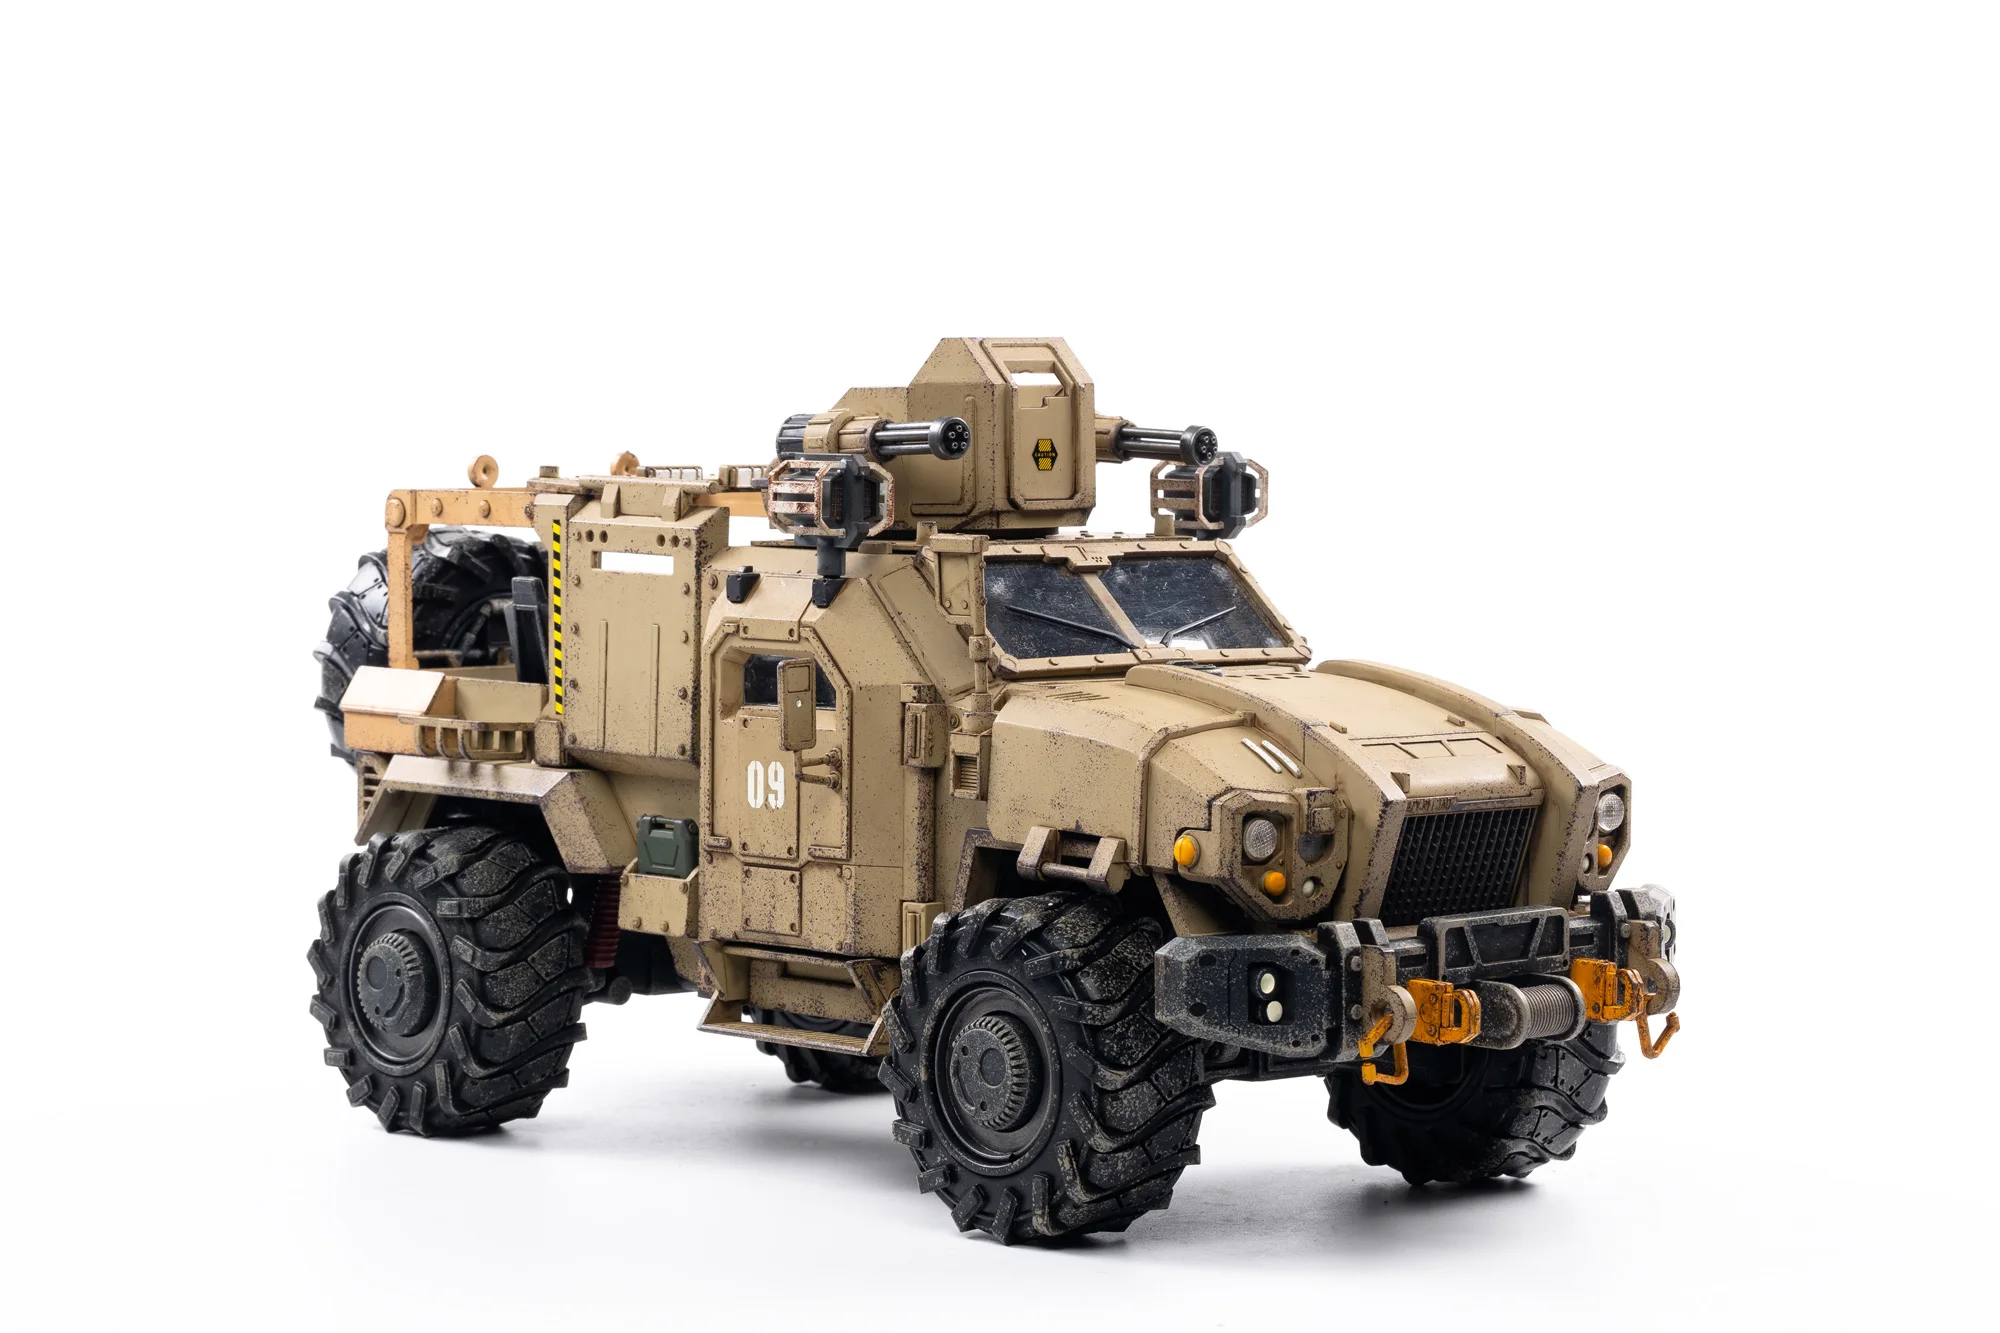 

1/18 JOYTOY Action Figure Crazy Reloaded SUV Desert Version (Excluding Characters) Collection Toy Military Anime Model